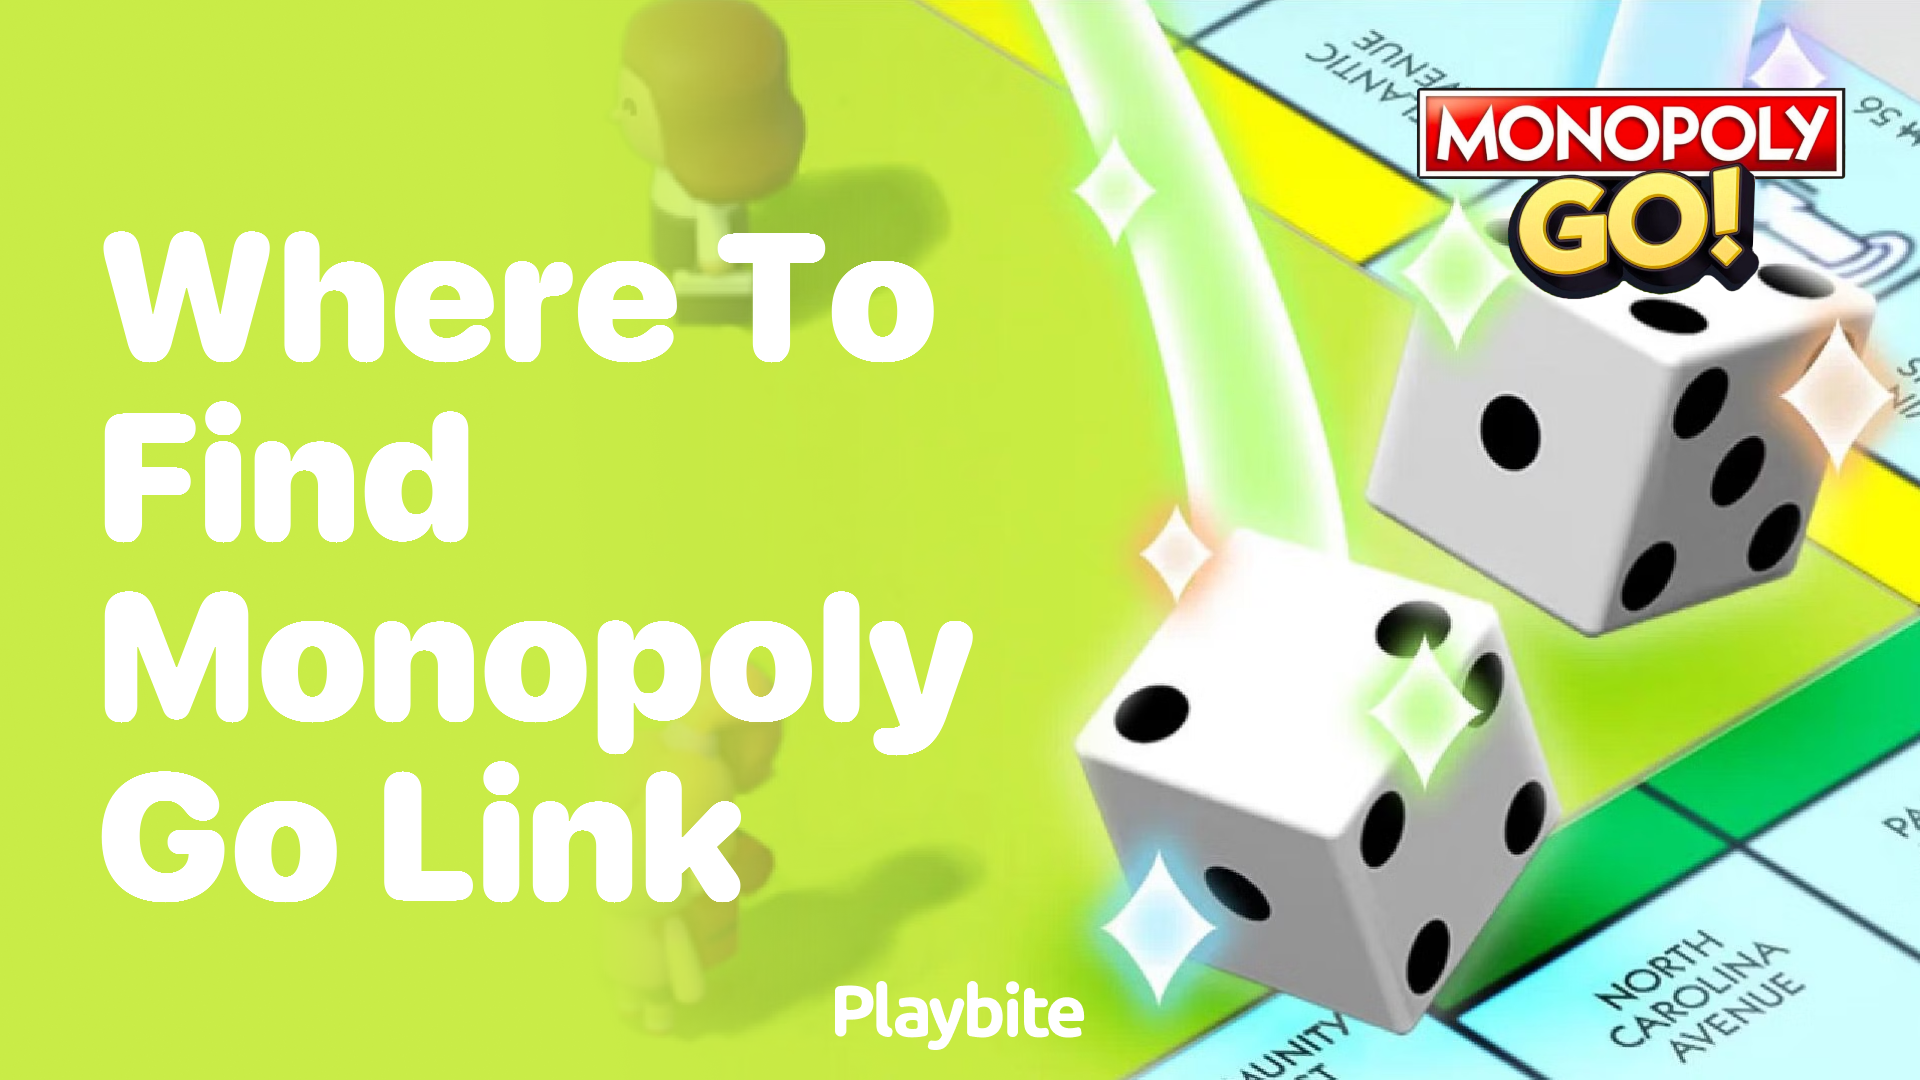 Where to Find Monopoly Go Links?